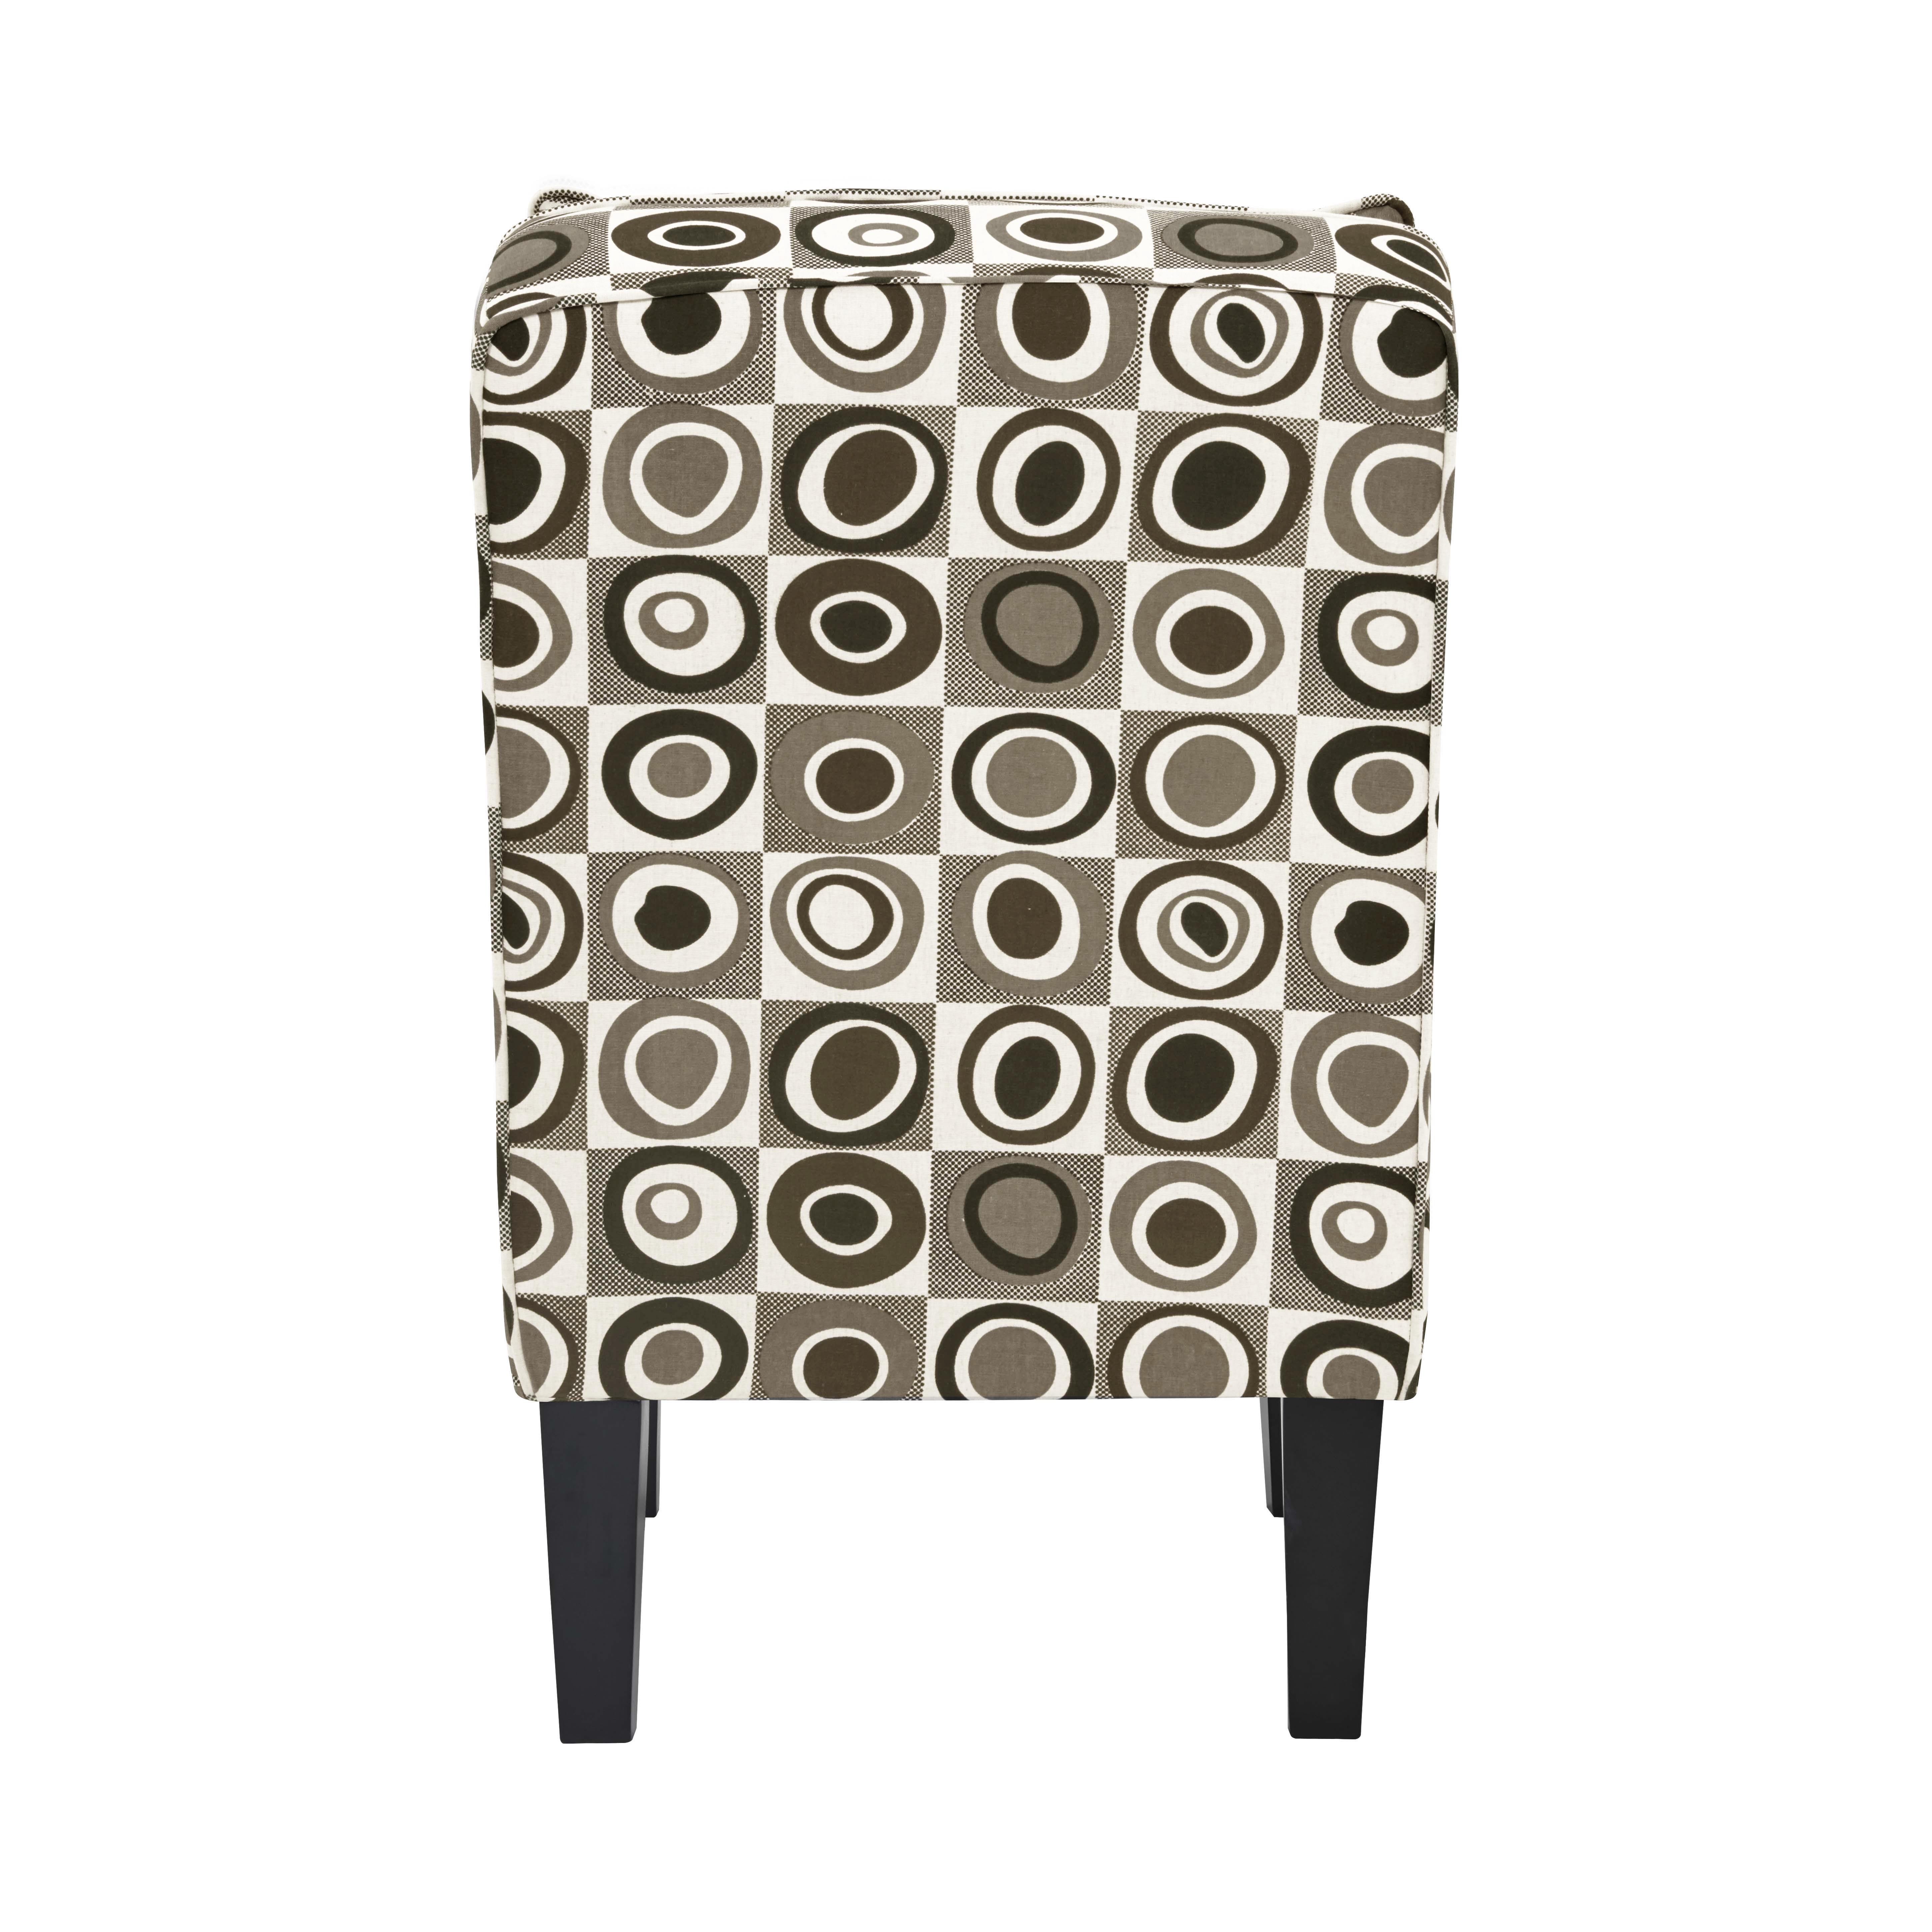 Homesvale Dani Multi-Color Set of 2 Slipper Chairs - image 6 of 9